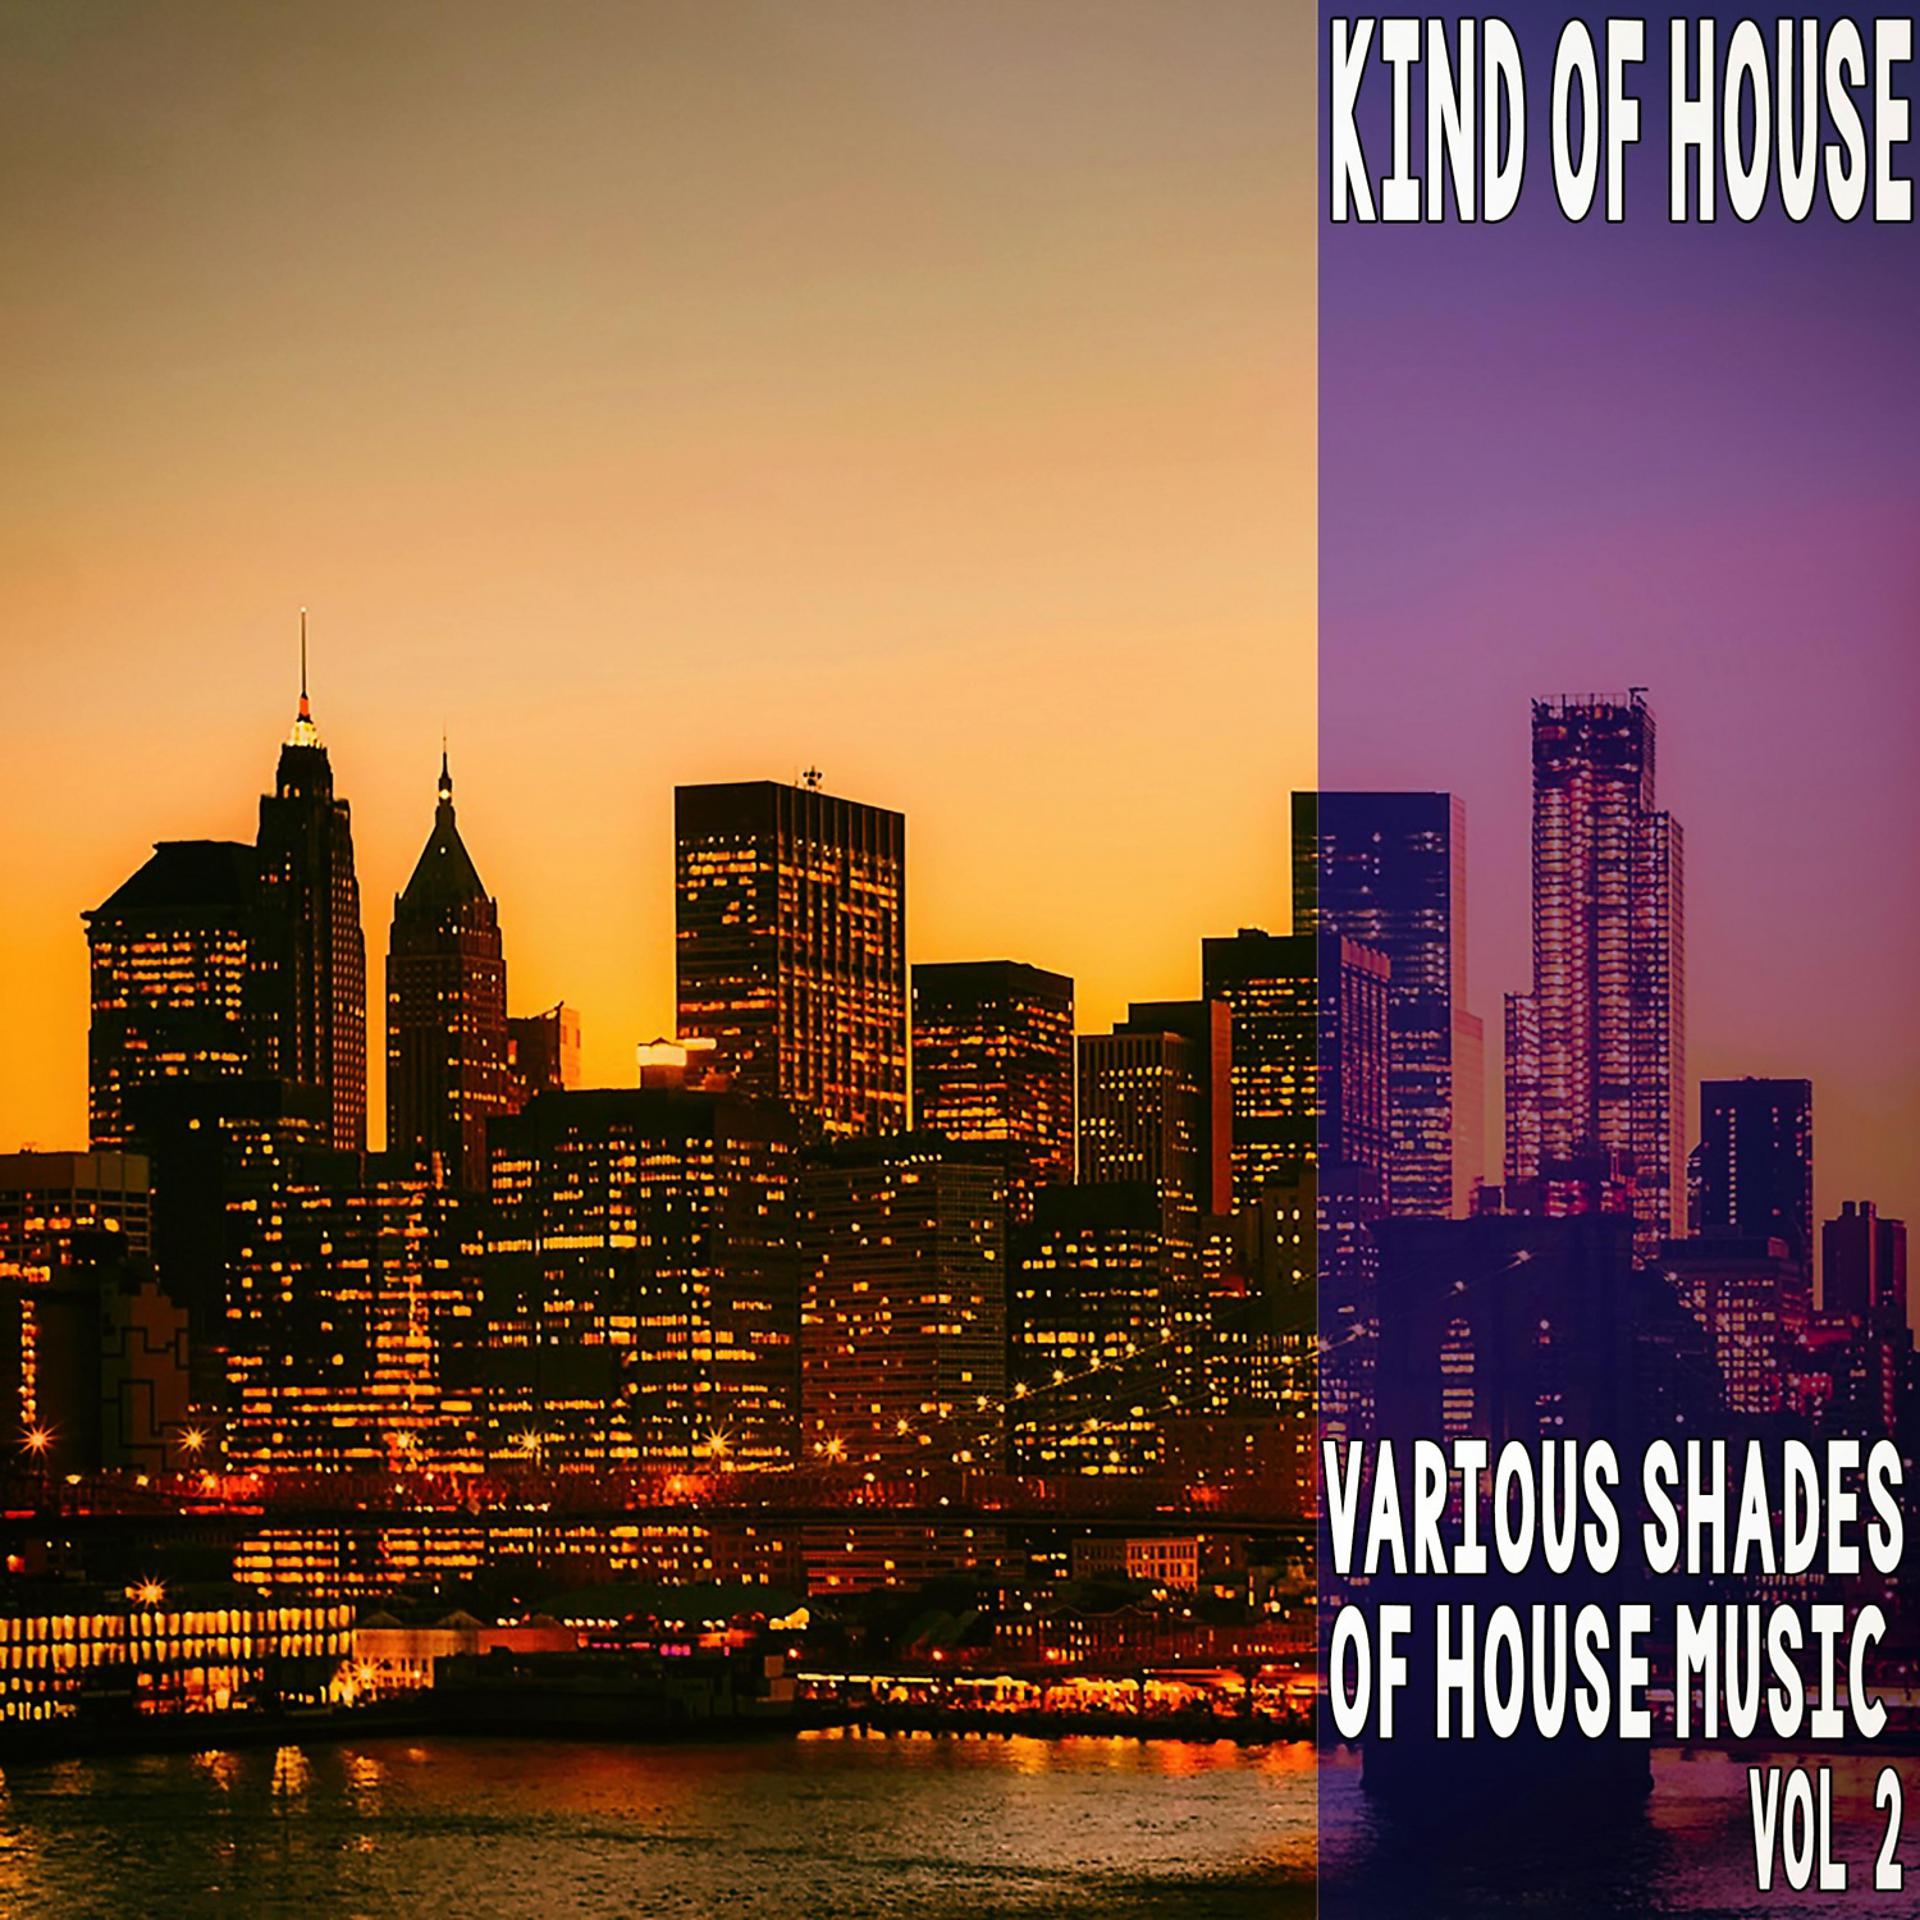 Постер альбома Kind of House, Vol. 2 - Various Shades of House Music